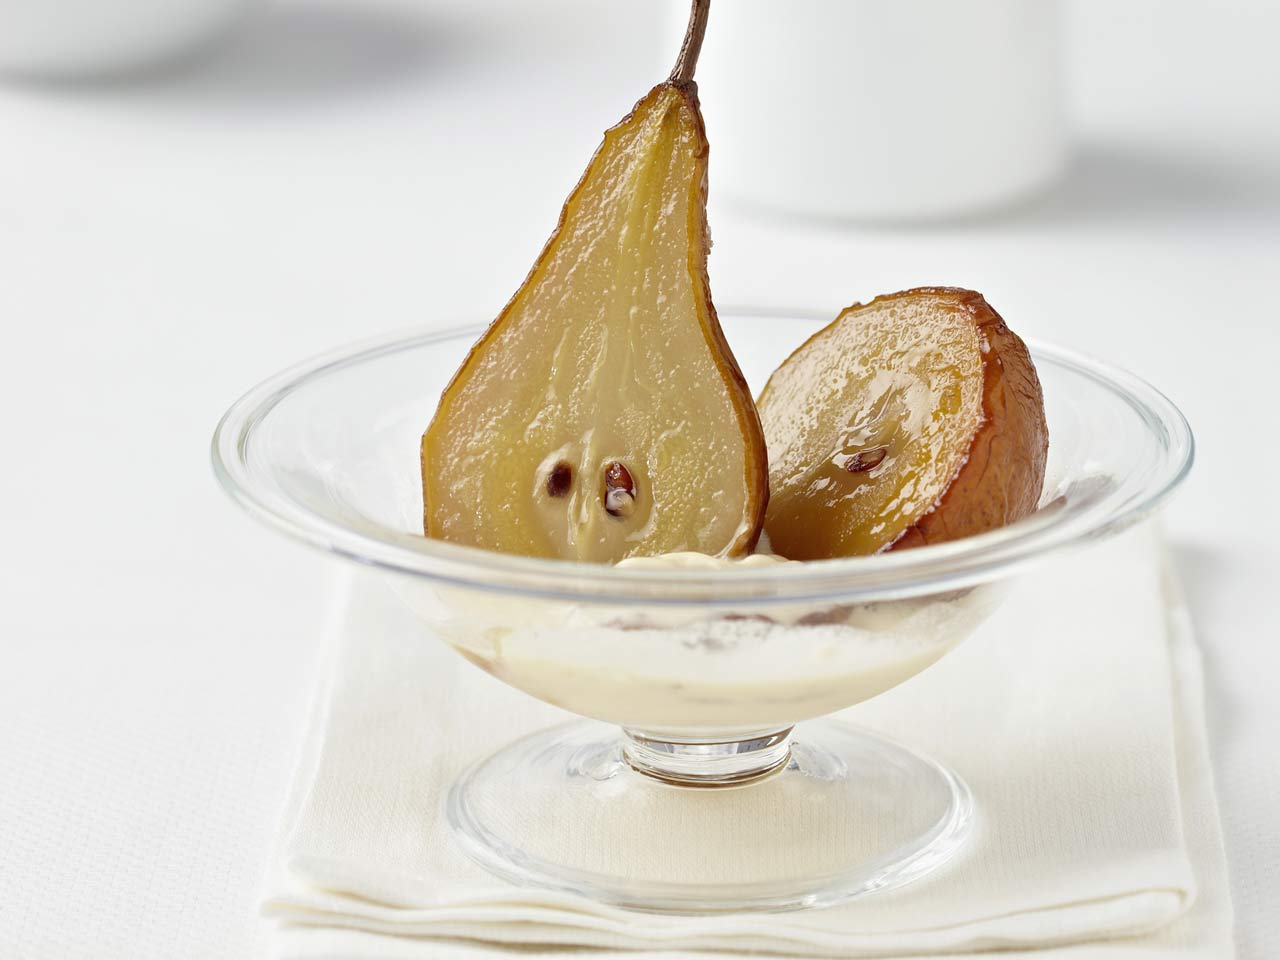 Pears baked in sherry